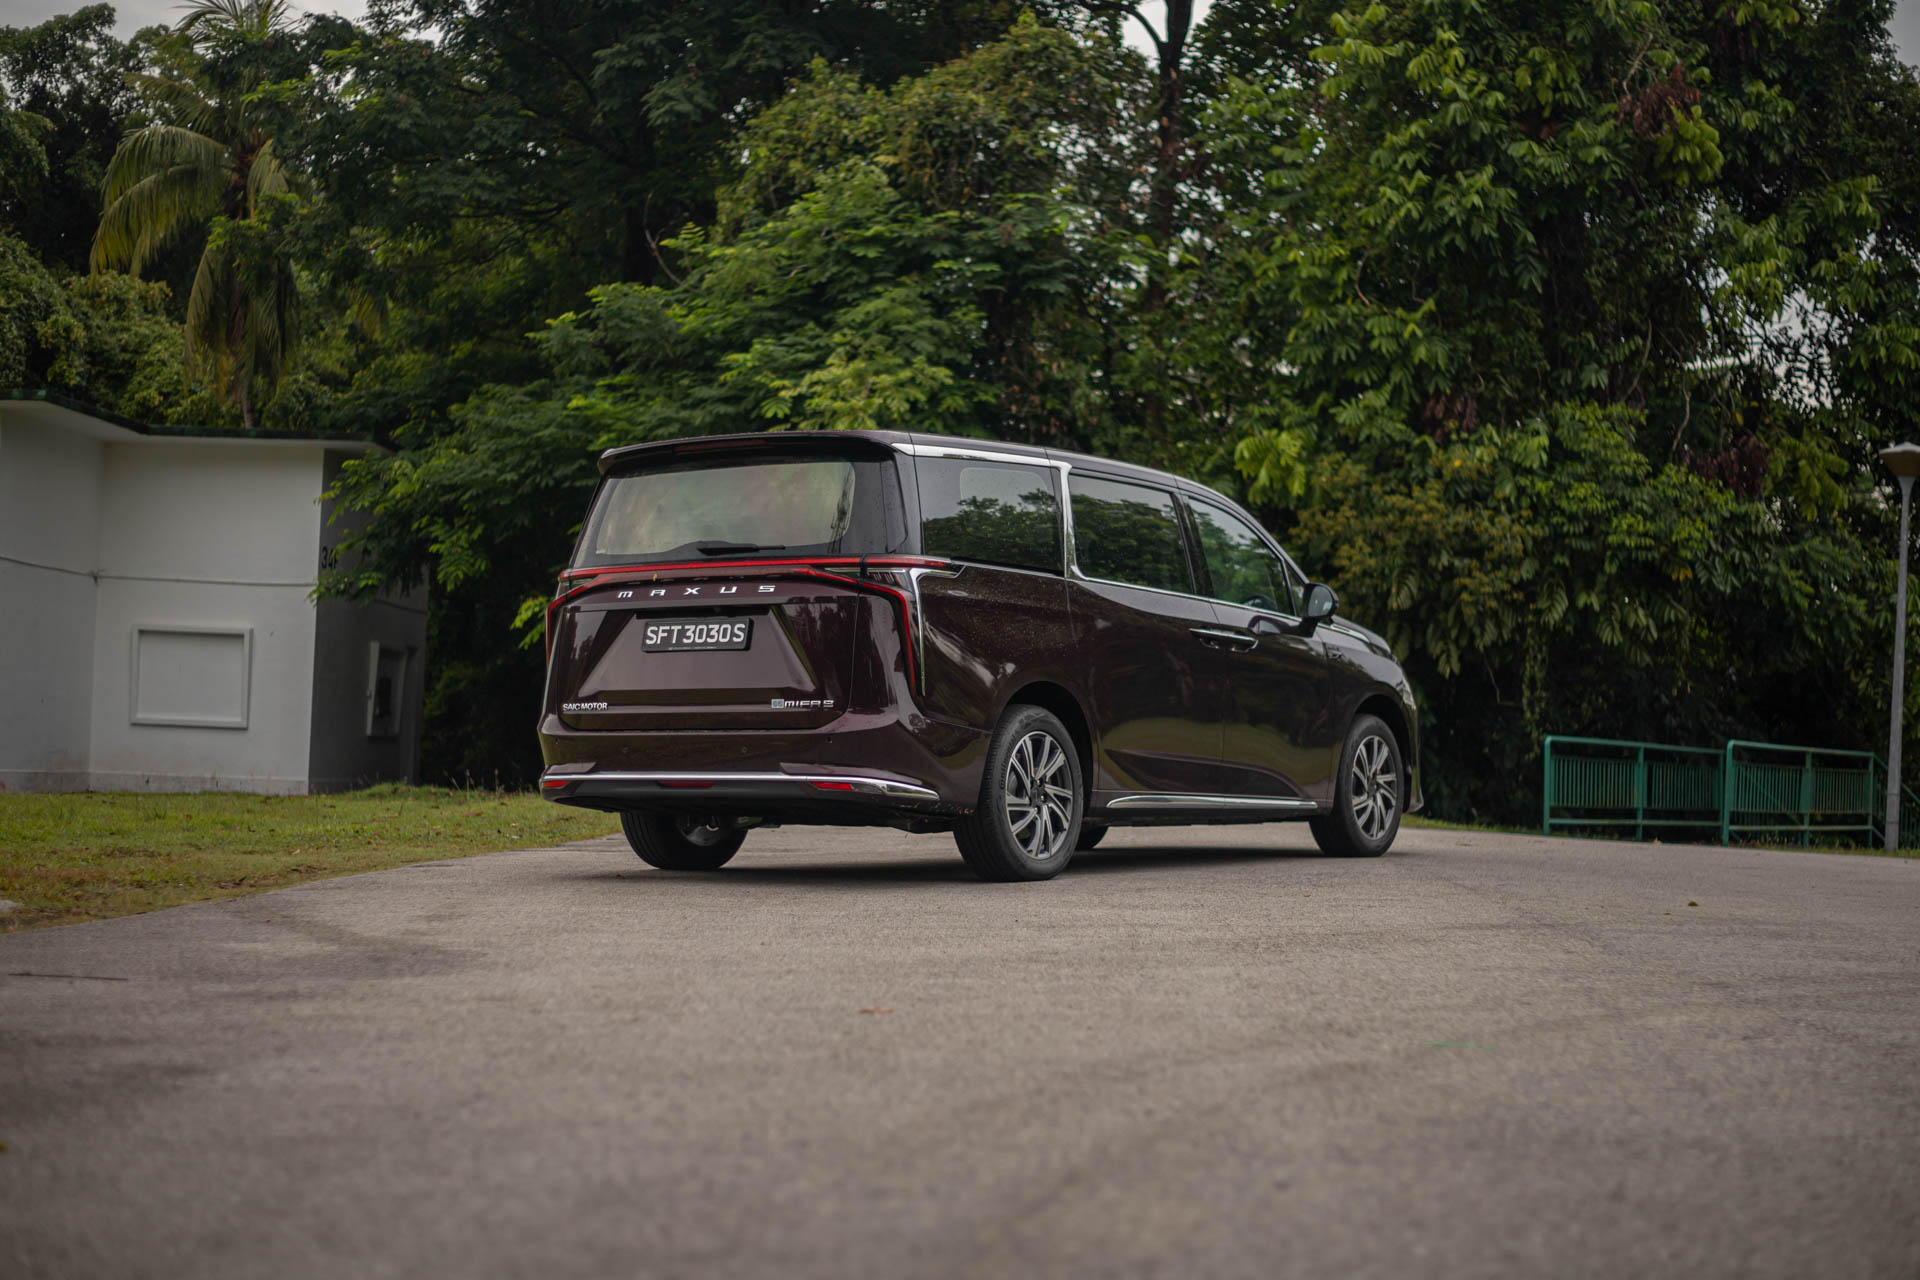 mreview: 2023 maxus mifa 9 - the best value electric luxury mpv